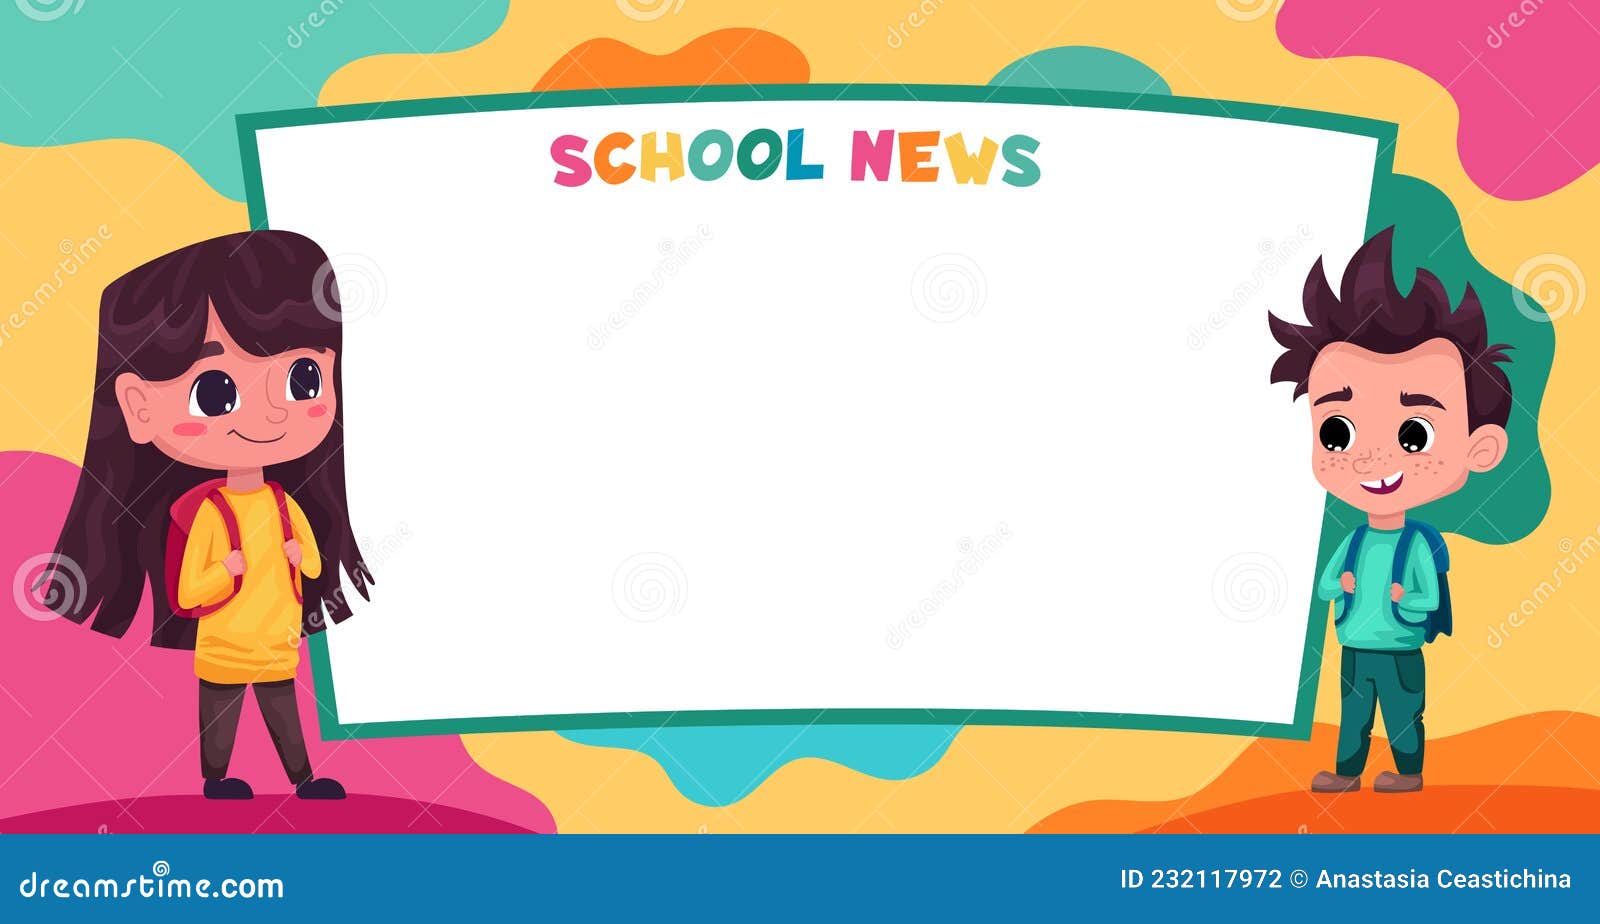 Cute Kids, Pupils Students Read School News. Space for Your Text. Template  for Advertising Brochure Stock Vector - Illustration of billboard, layout:  232117972